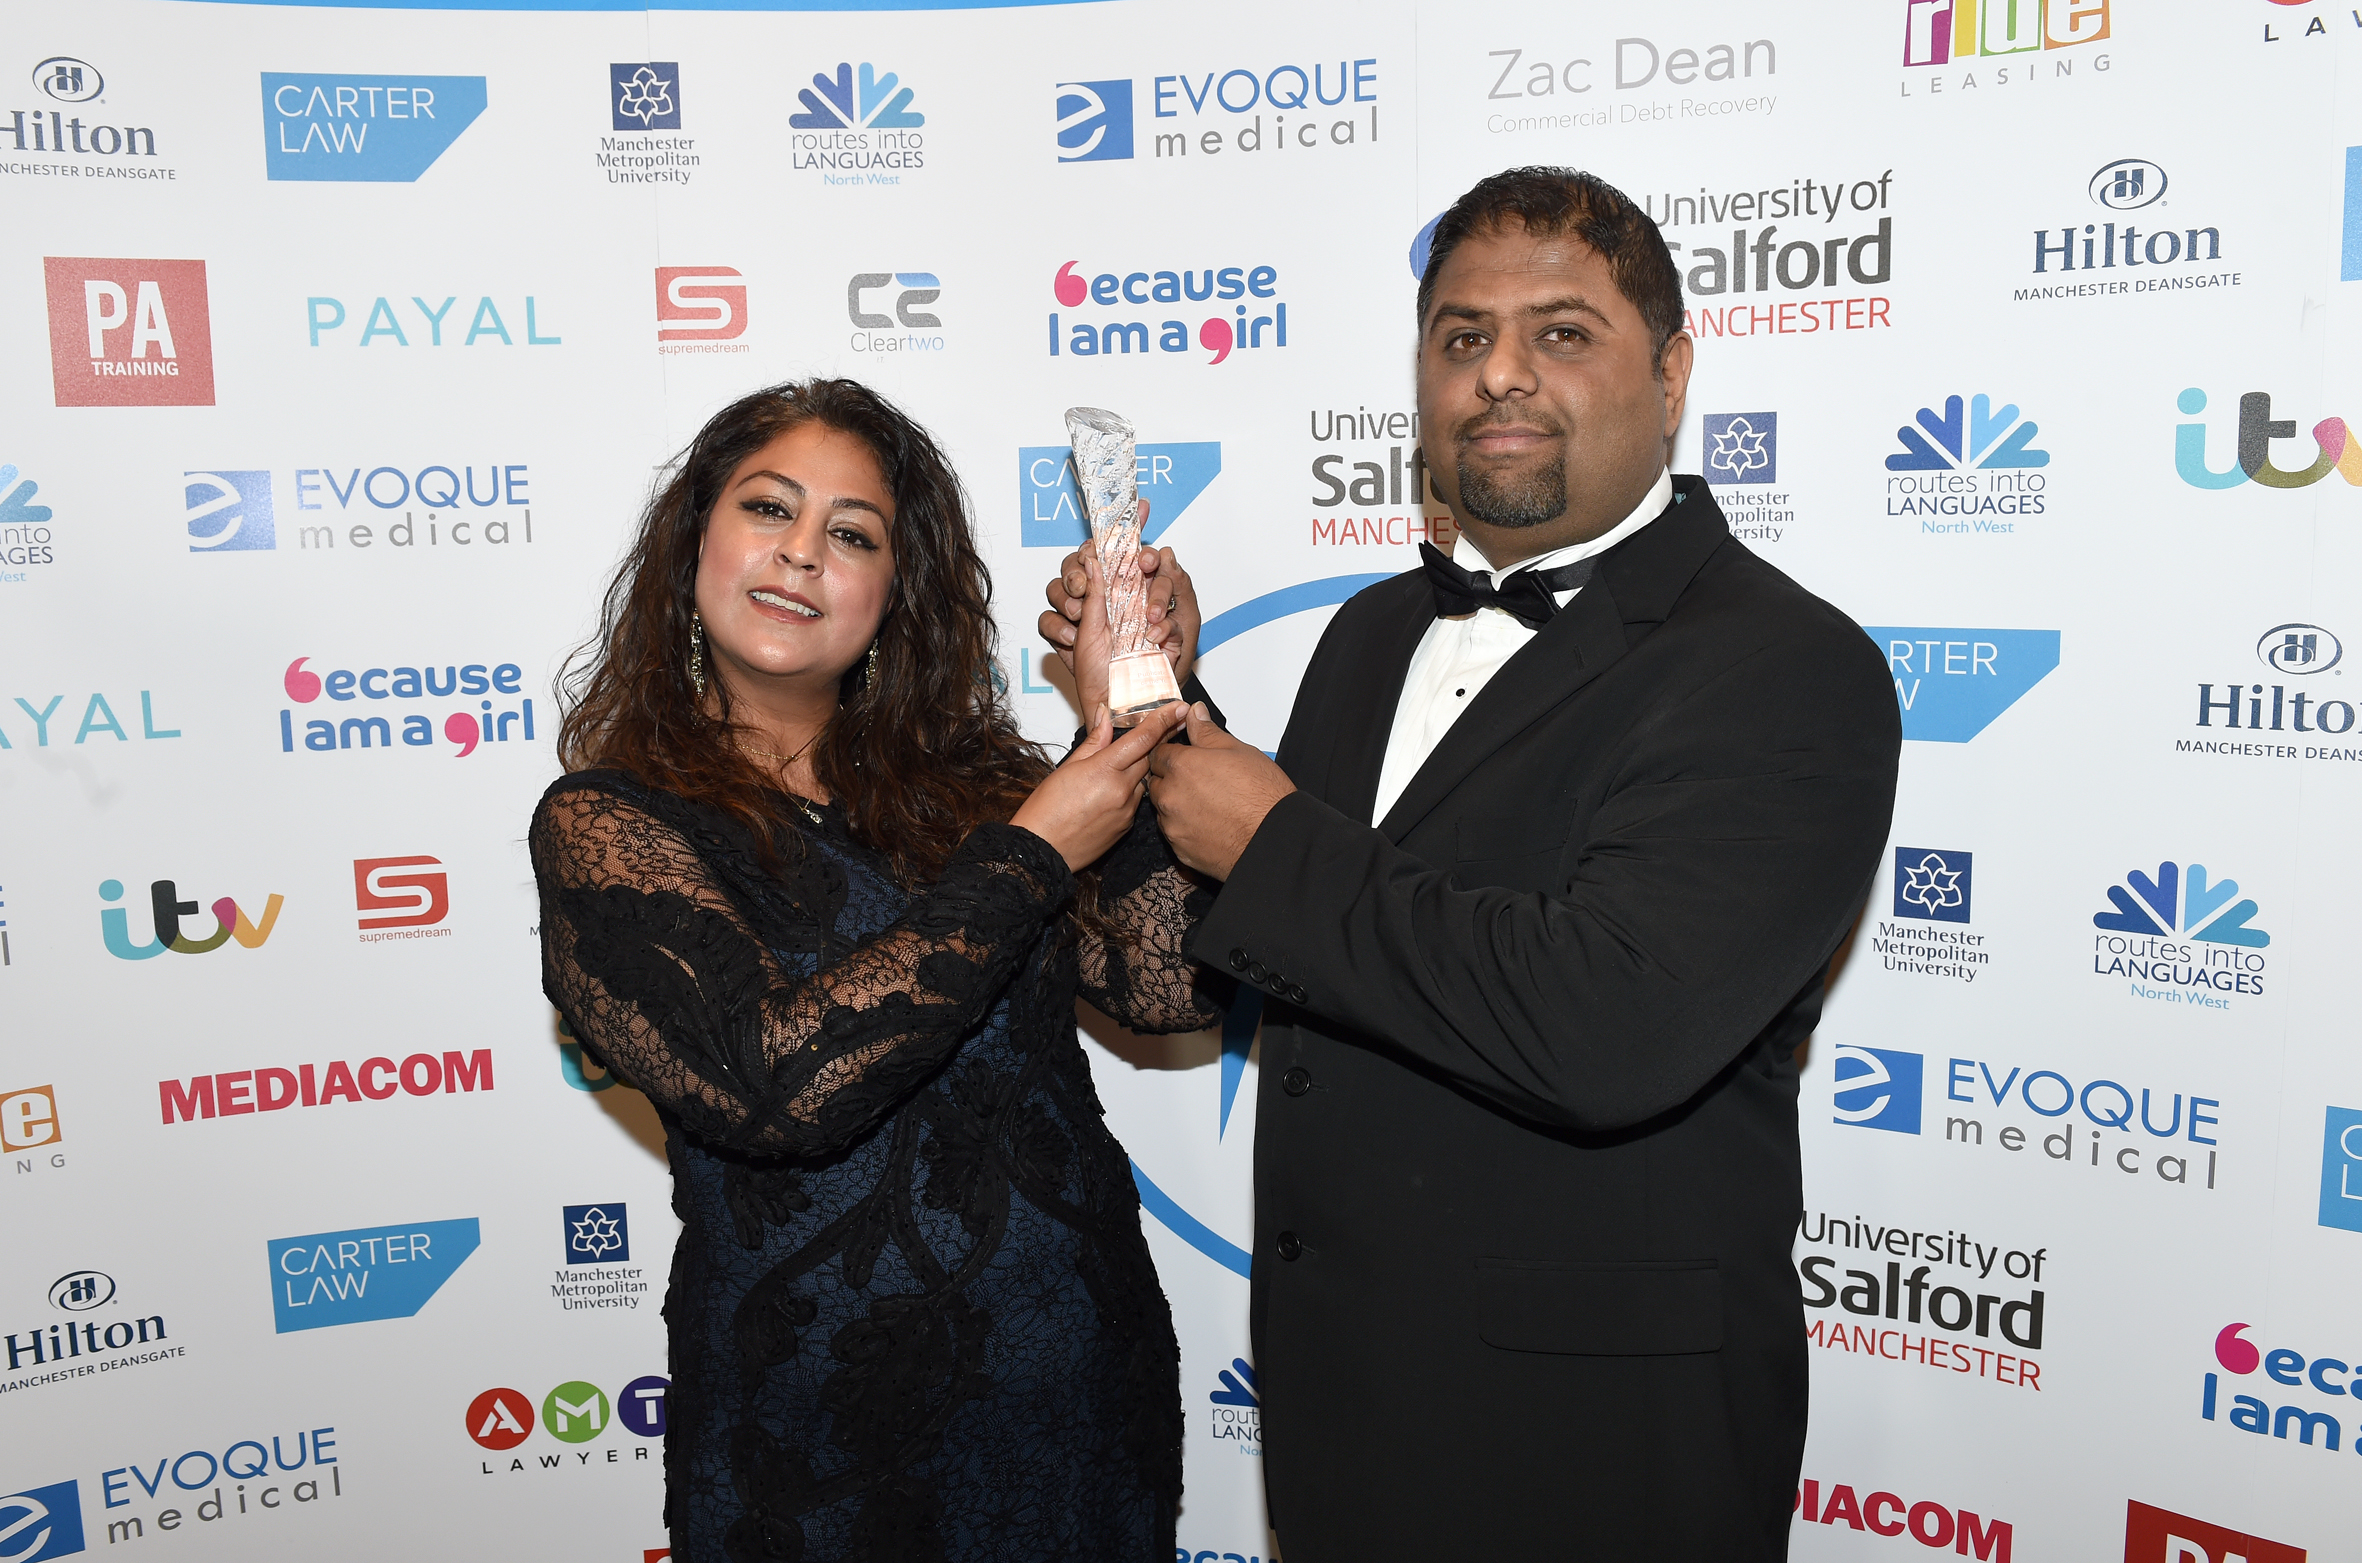 Yorkshire Based Asian Express Wins Publication of the Year Accolade